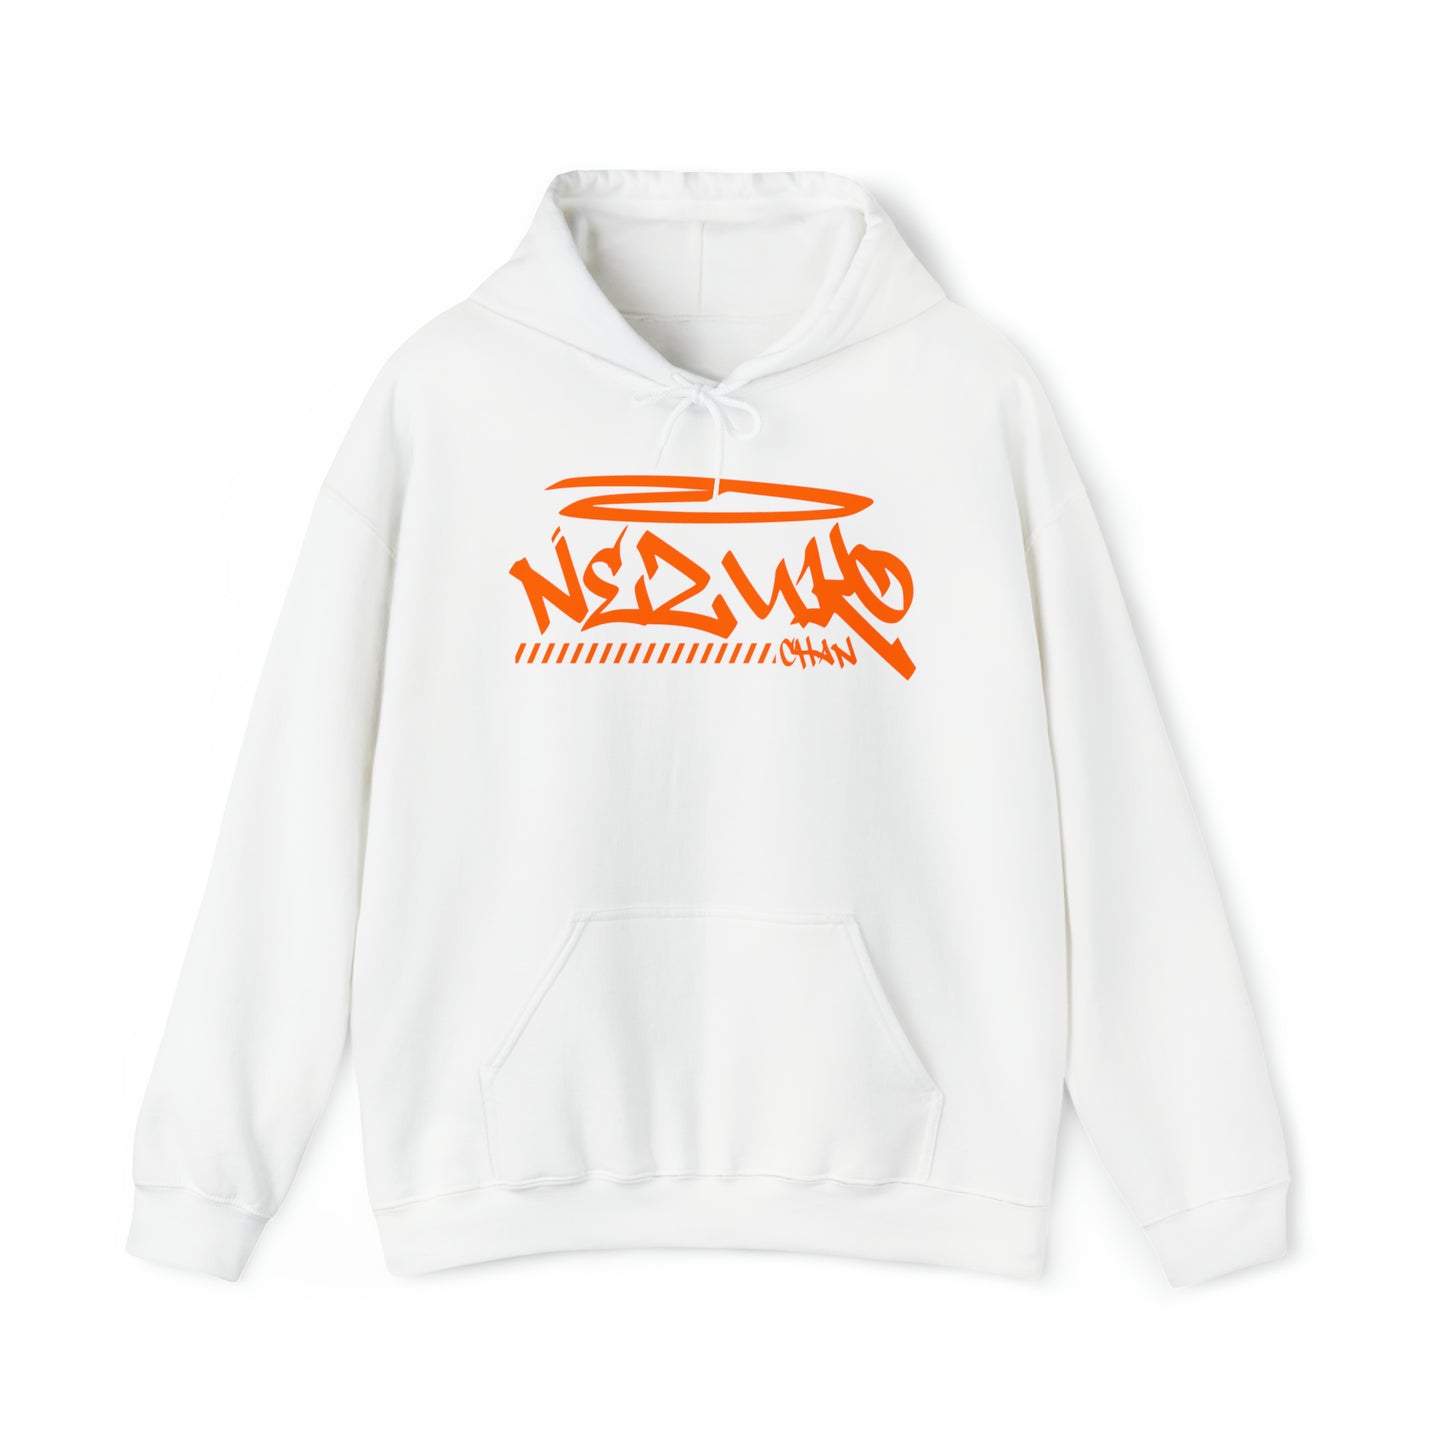 Yuesuo Classic Hoodie